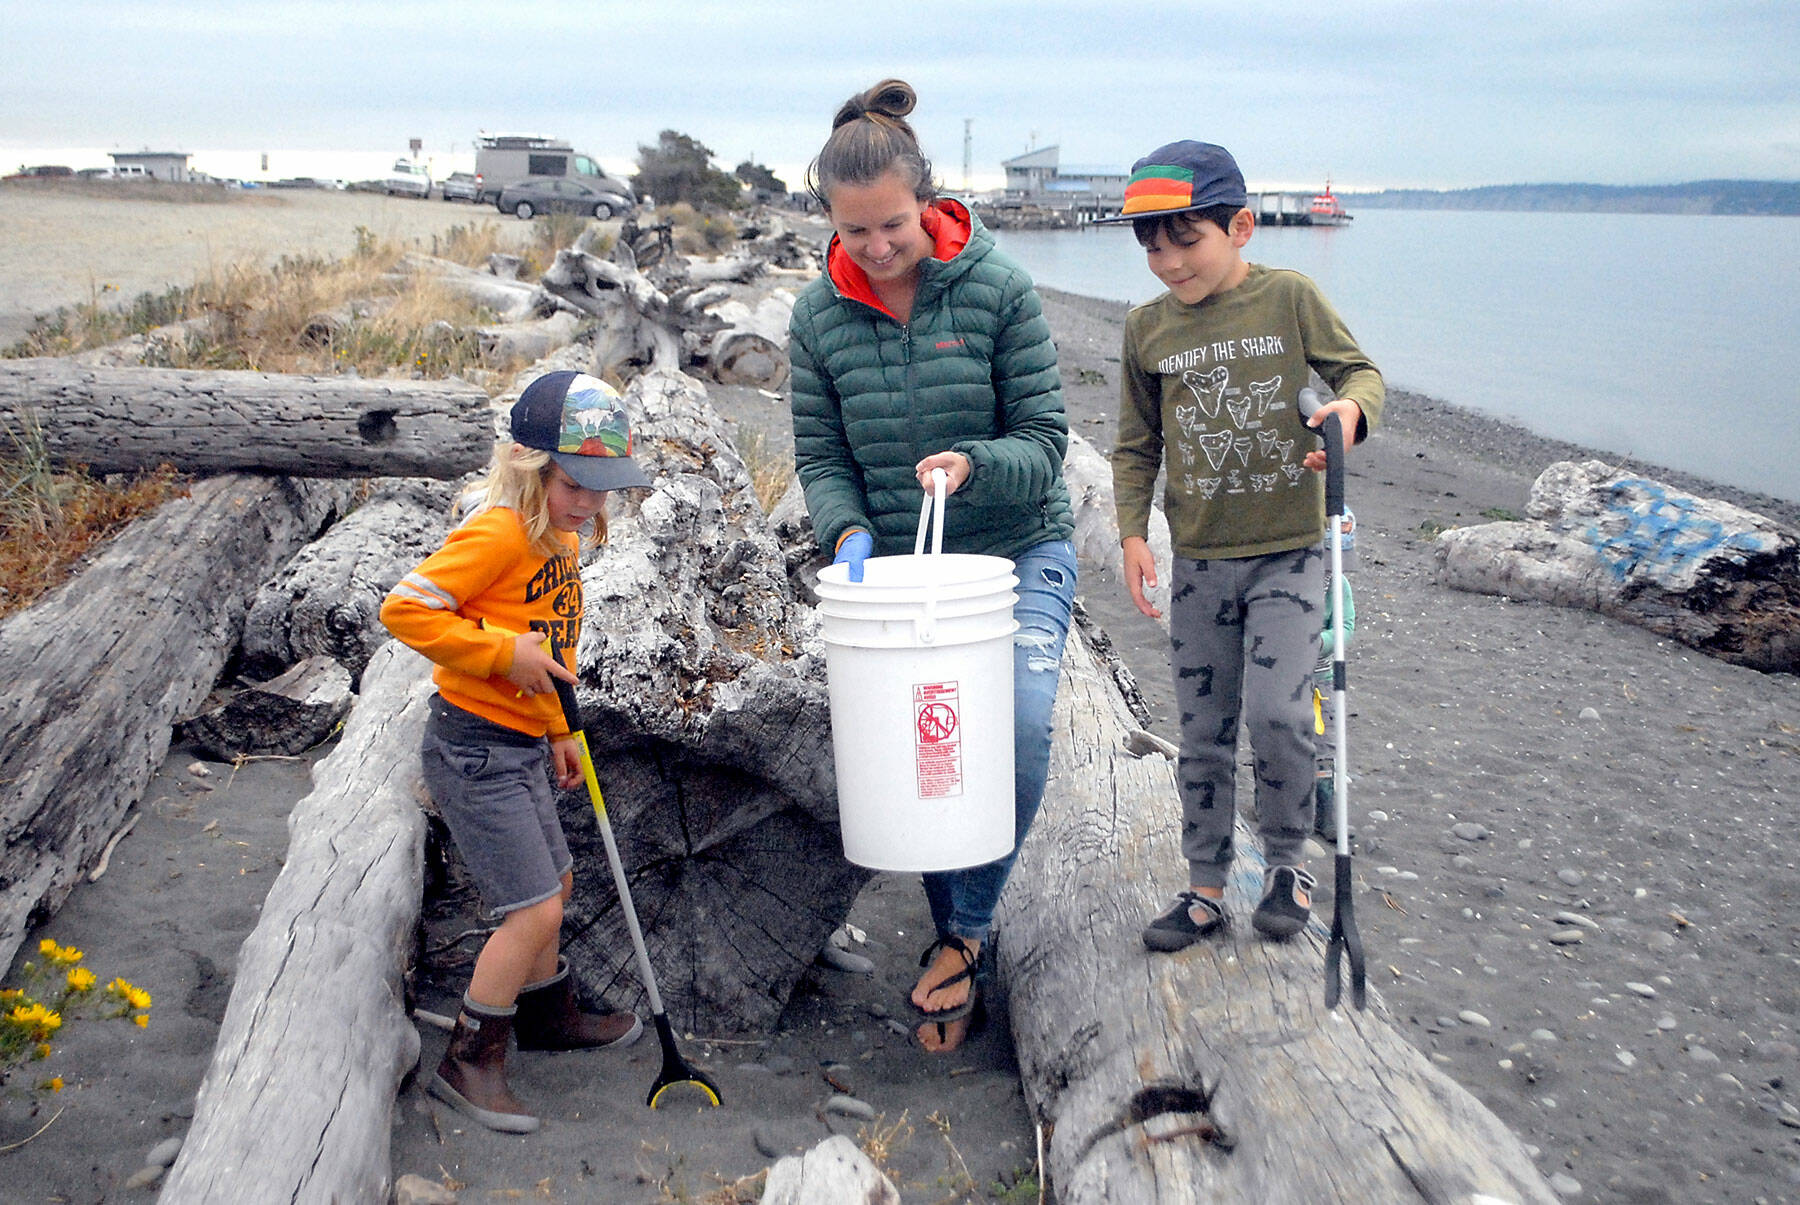 Tegan Glaude of Port Angeles, center, along with 5-year-old Wolf Schultz-Wade, left, and Odin Glaude, 6, pick up trash in the driftwood along Ediz Hook in Port Angeles as part a beach cleanup effort in 2021. The event was hosted by CoastSavers and the Olympic Peninsula Chapter of the Surfrider Foundation. (Keith Thorpe/Peninsula Daily News)